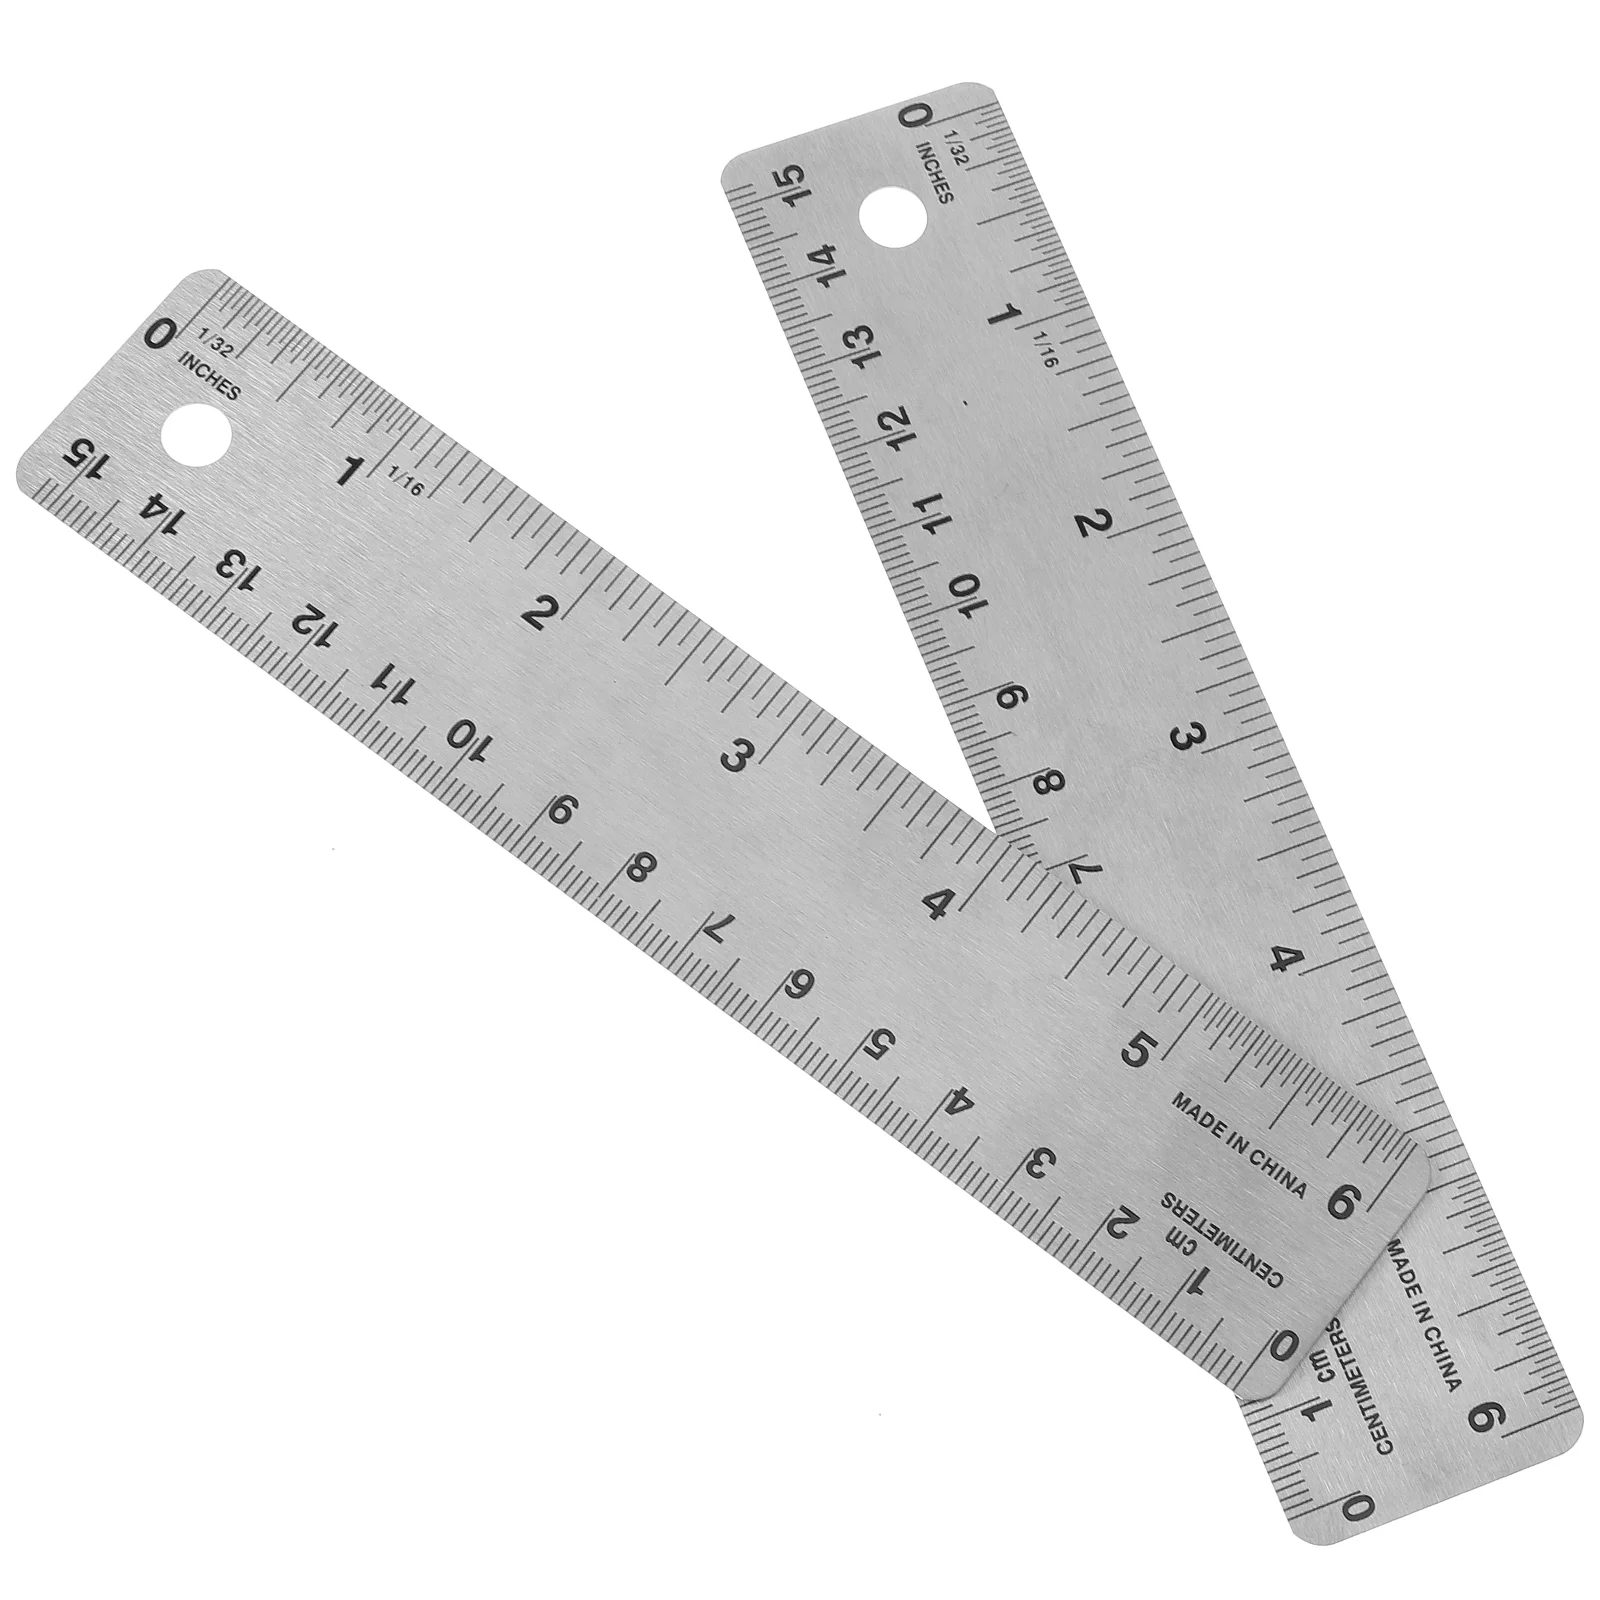 2 Pcs Cork Stainless Steel Ruler Straight Woodworking Measuring Corked Rulers for Engineering Drawing Student ruler measuring woodworking gauge straight steel stainless scale rulers clip stop fence precision marking gaps stopper tool 15cm